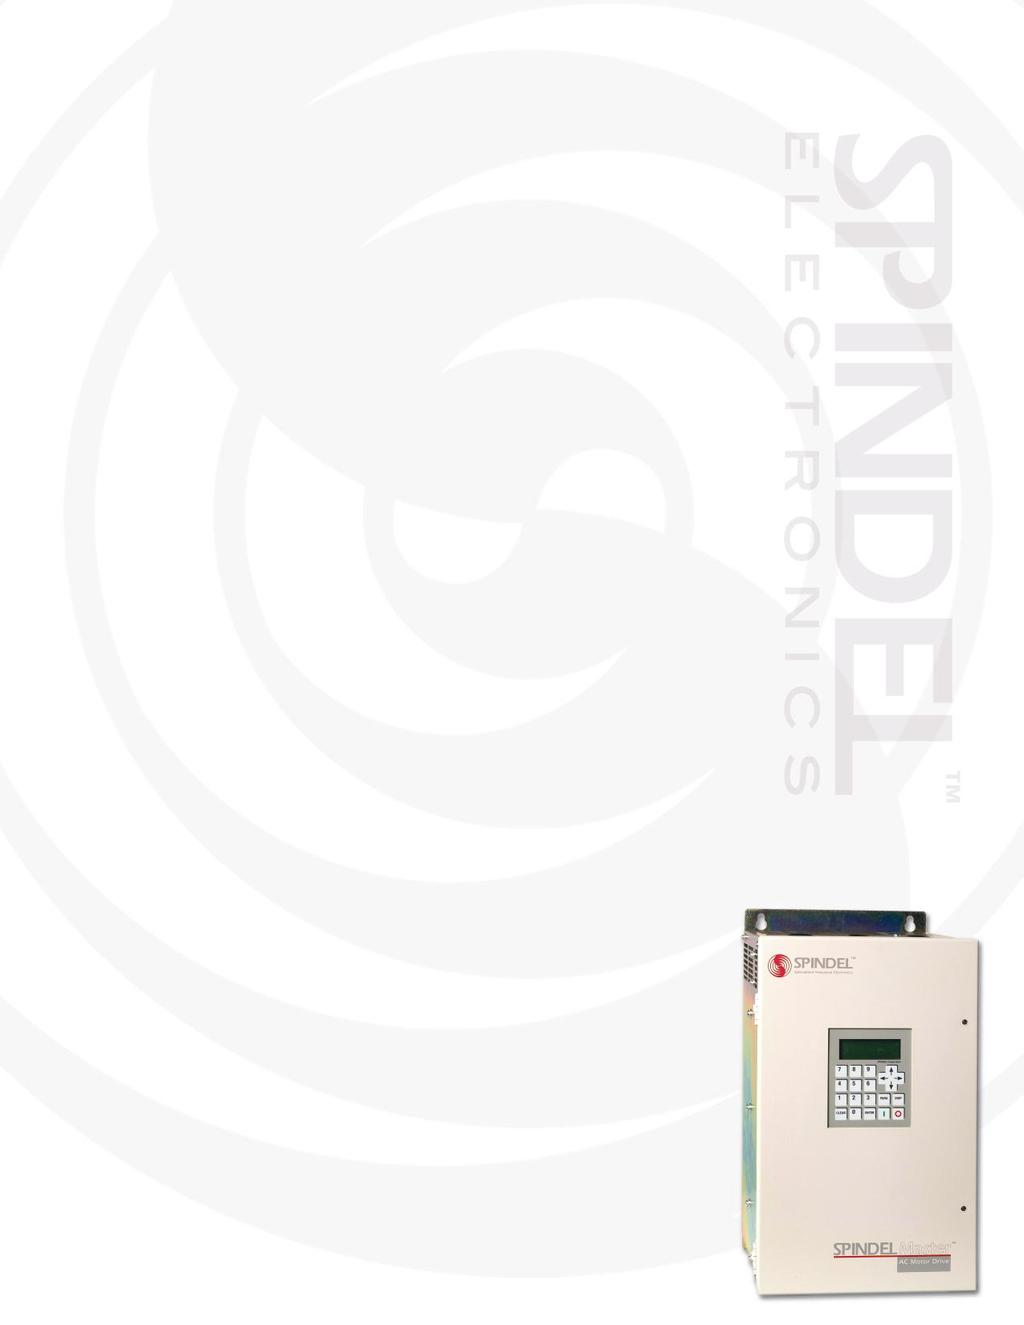 SPINDEL Master Series AC Motor Drives Standard Features: Motor (output) frequencies to 400 Hz (L), 800 Hz (M) and 200 Hz (H) Synchronized high frequency PWM control (20/40 khz for most applications)